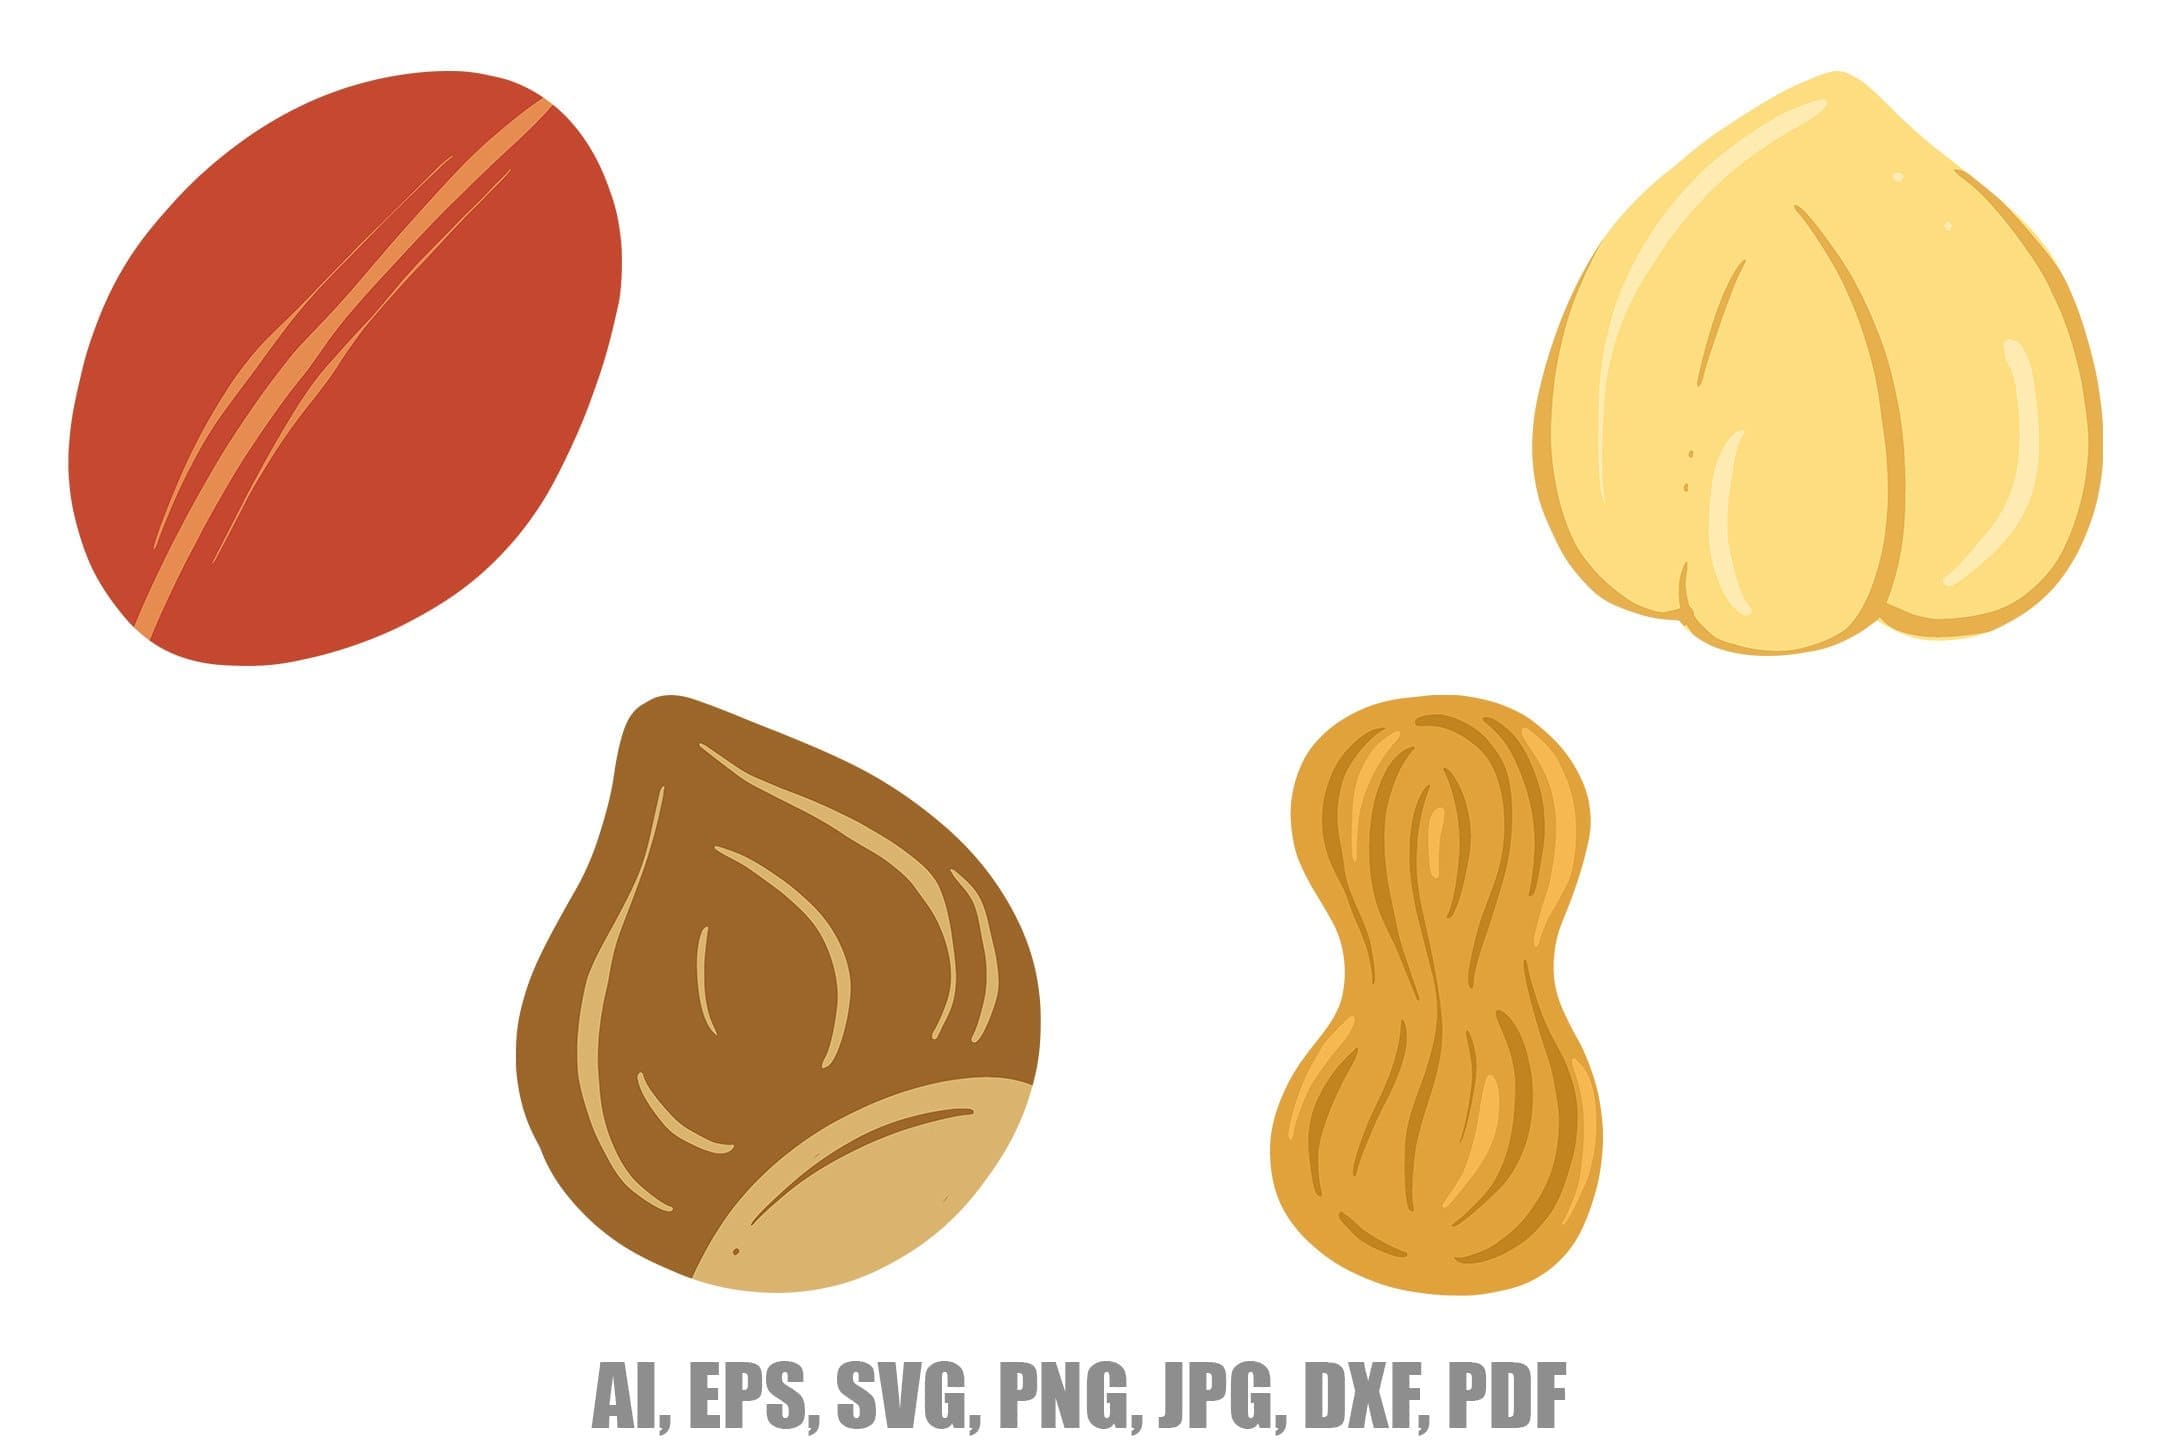 Collection of illustrations of nuts and seeds: peanut, hazelnut, Brazil nut, cashew.